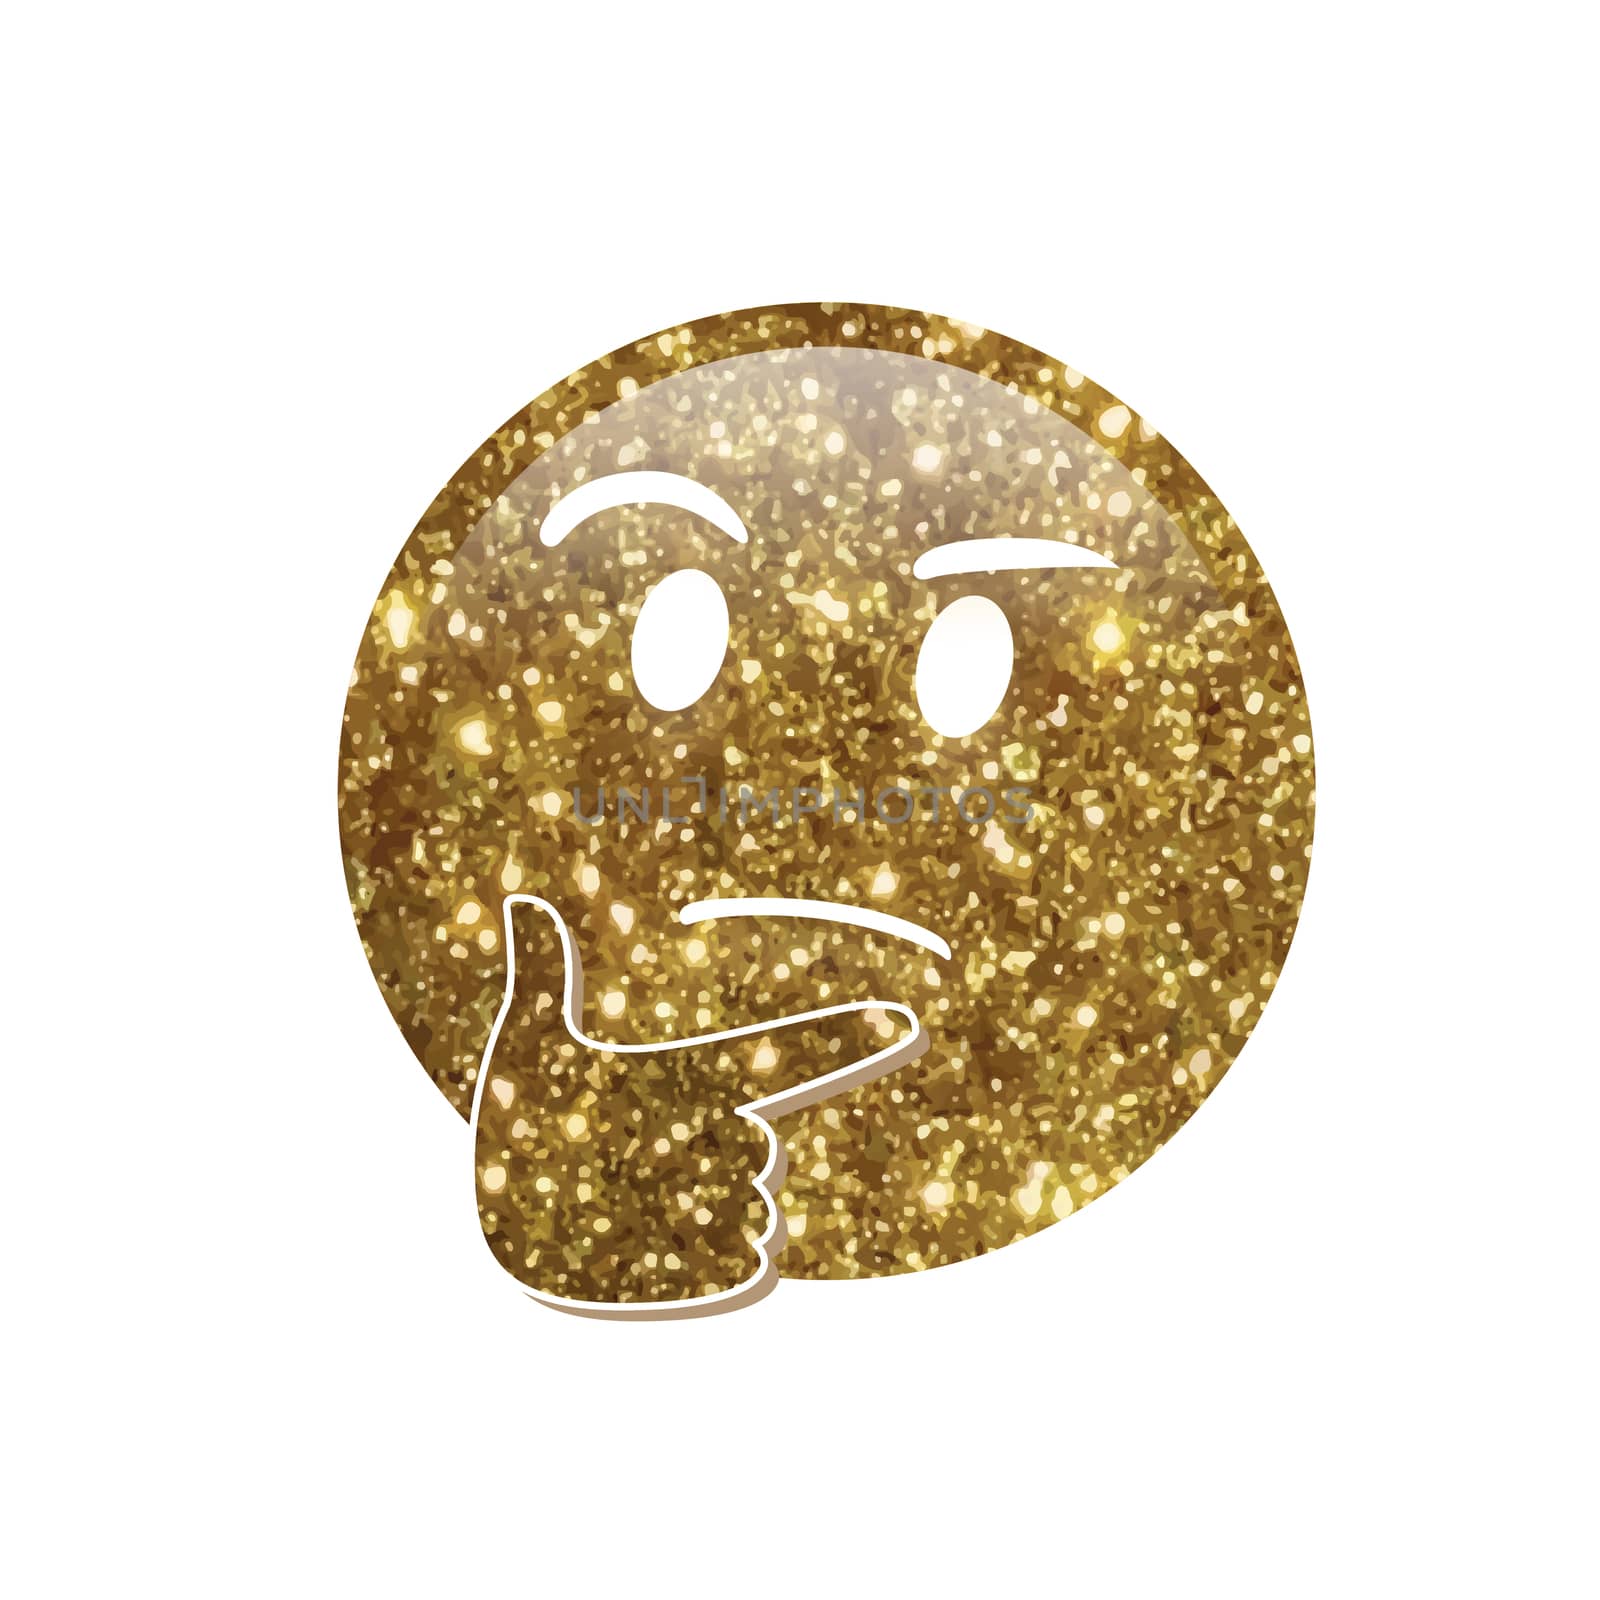 Emoji golden glitter pondering face with right hand icon by cougarsan